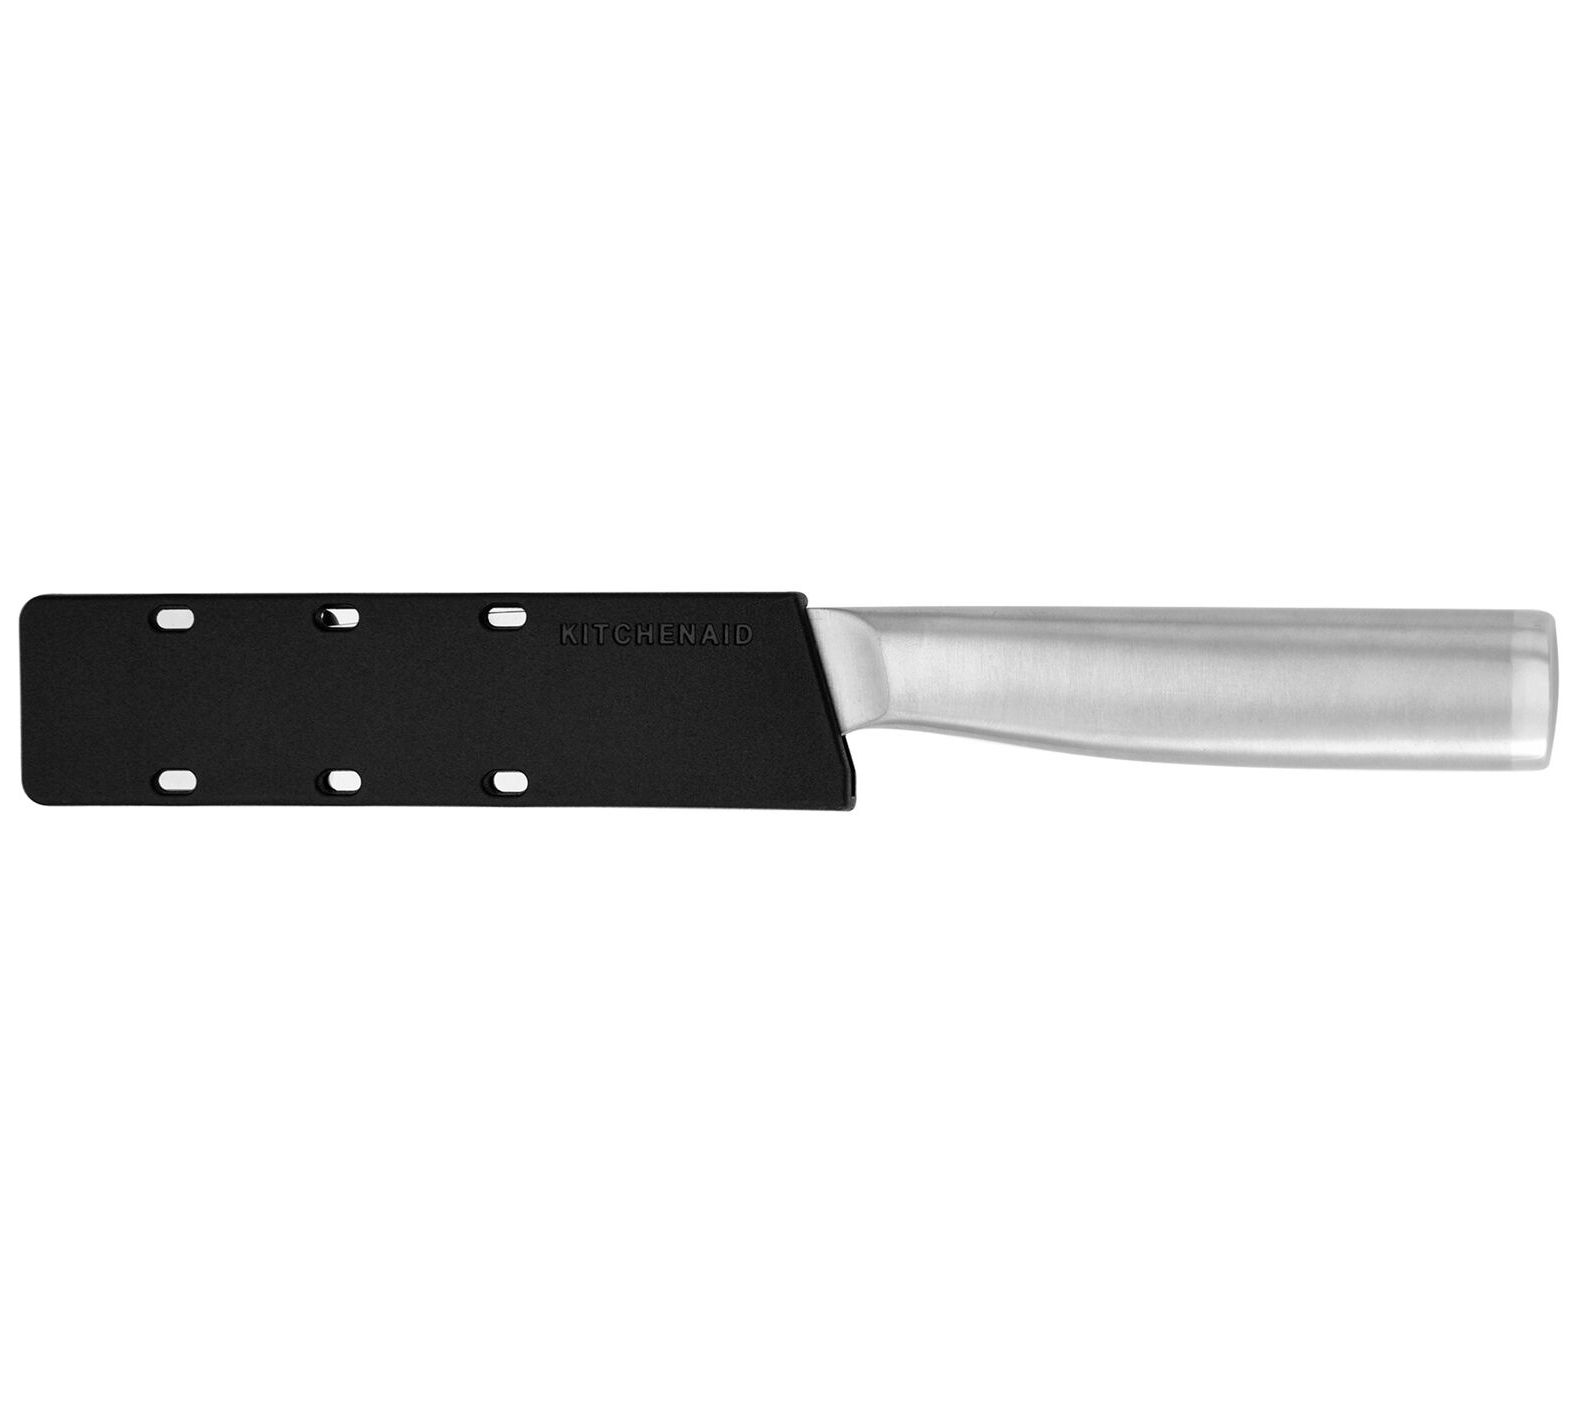 Kitchenaid Classic Serrated Paring Knife with Endcap and Blade Cover,  3.5-inch, Black 